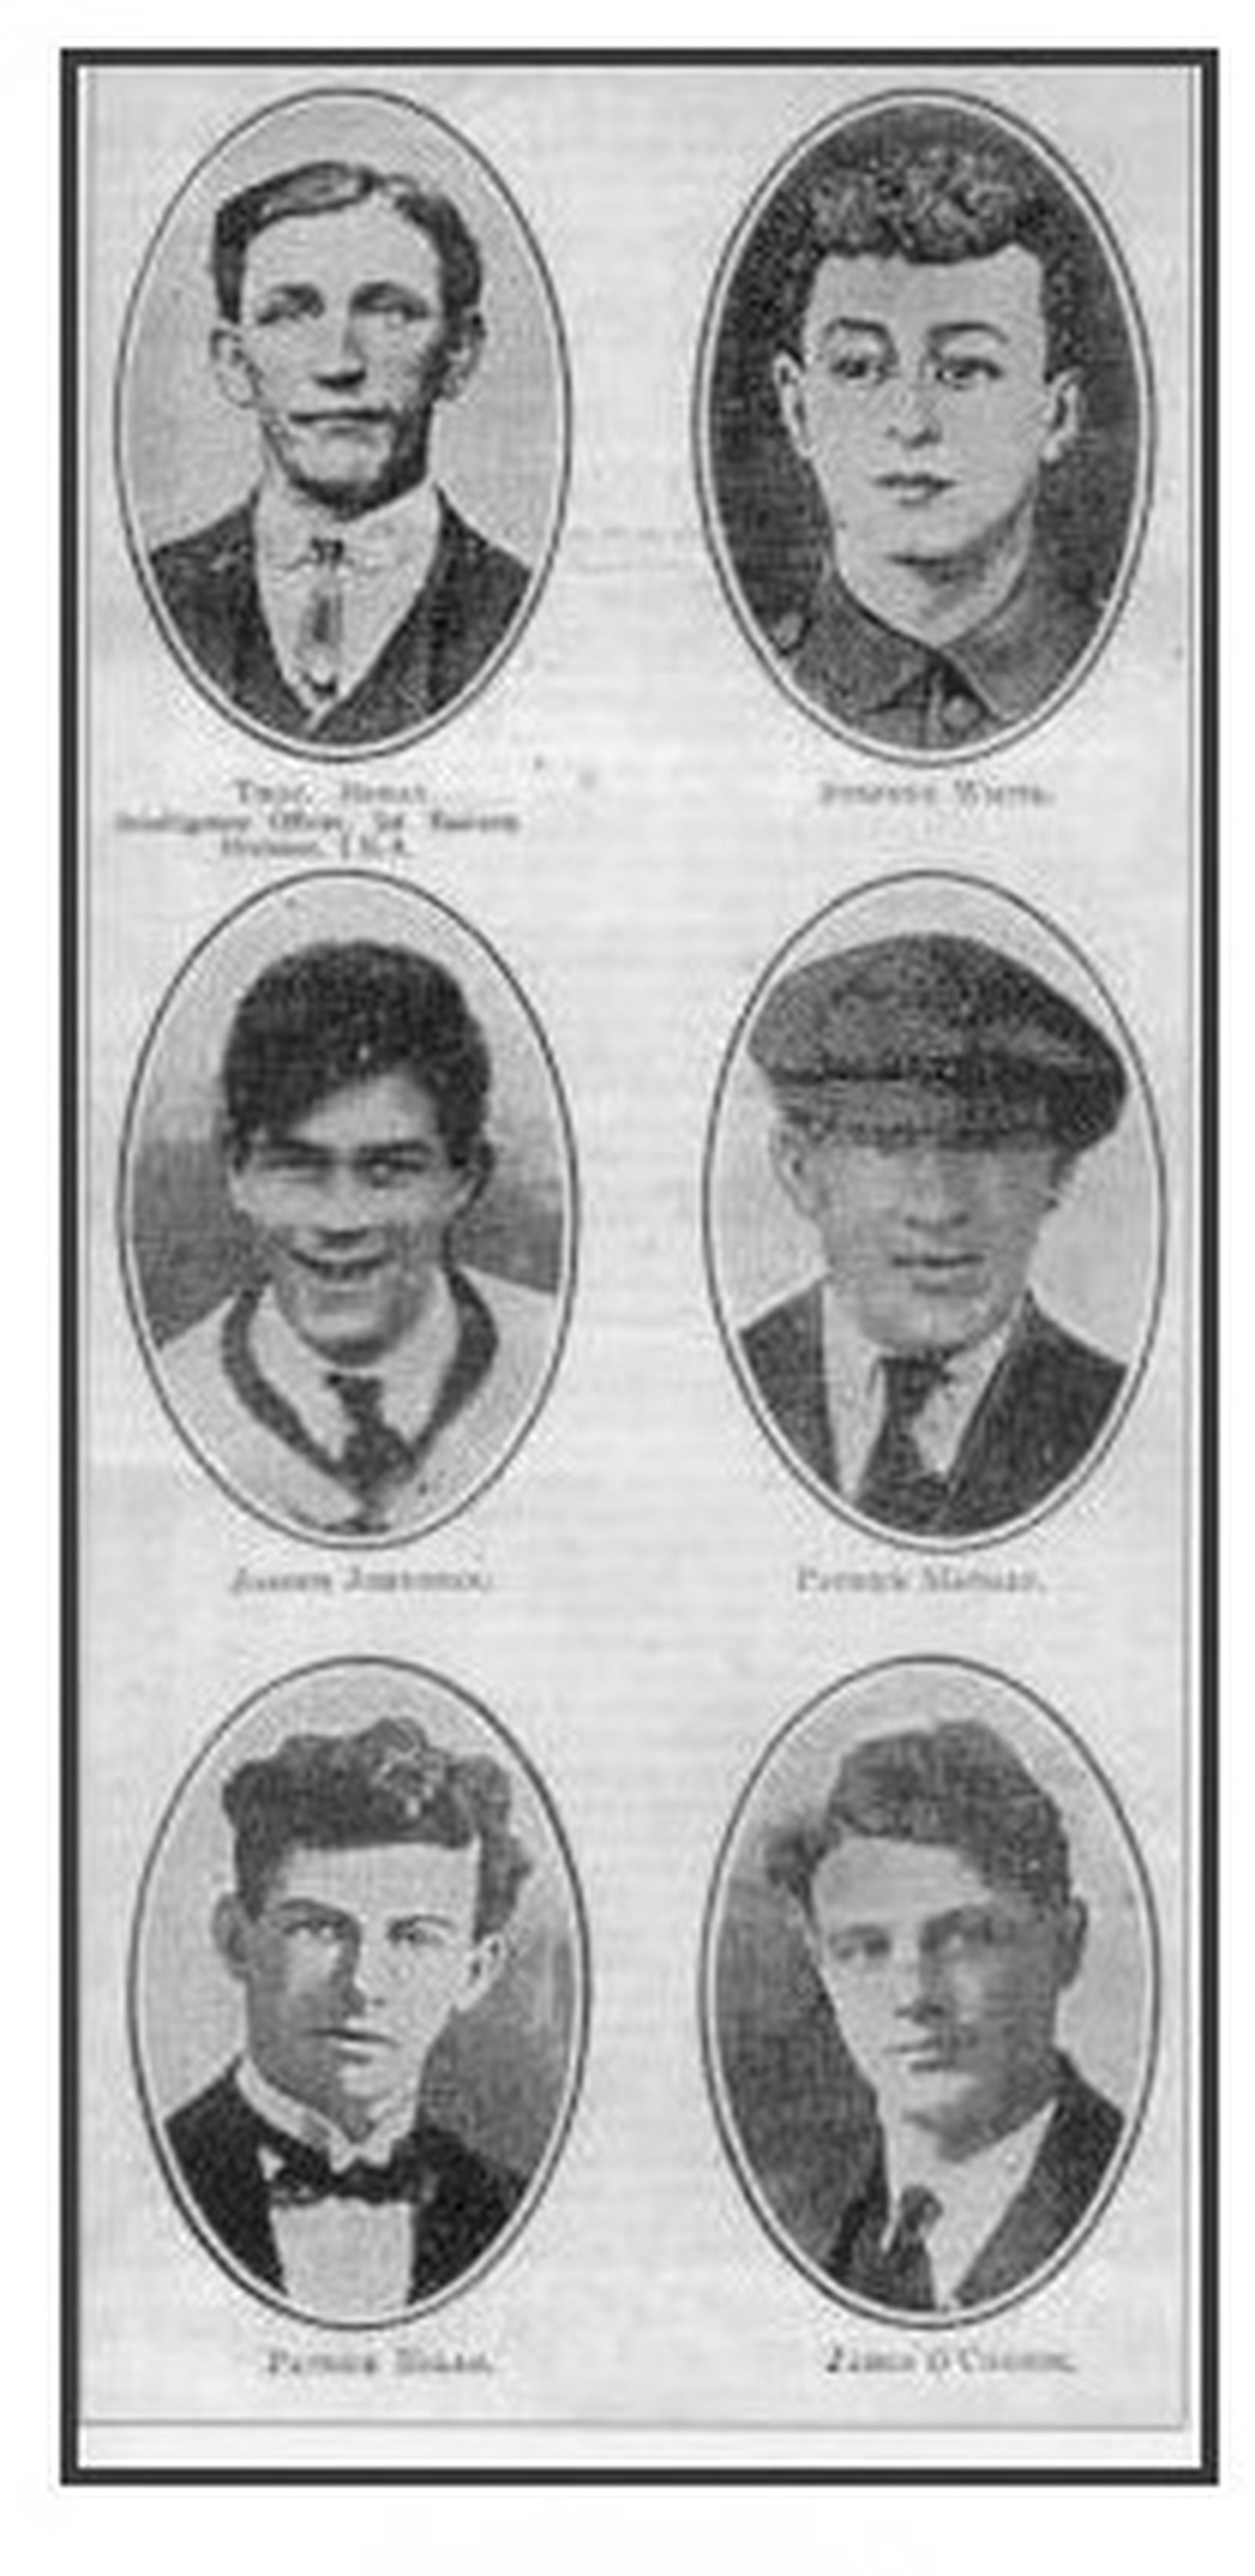 Image - A photo memorial to six of the seven men executed in the Curragh Camp. Credit: Éire (The Irish Nation) Magazine Vol 1, No. 49, Dec 22 1923.